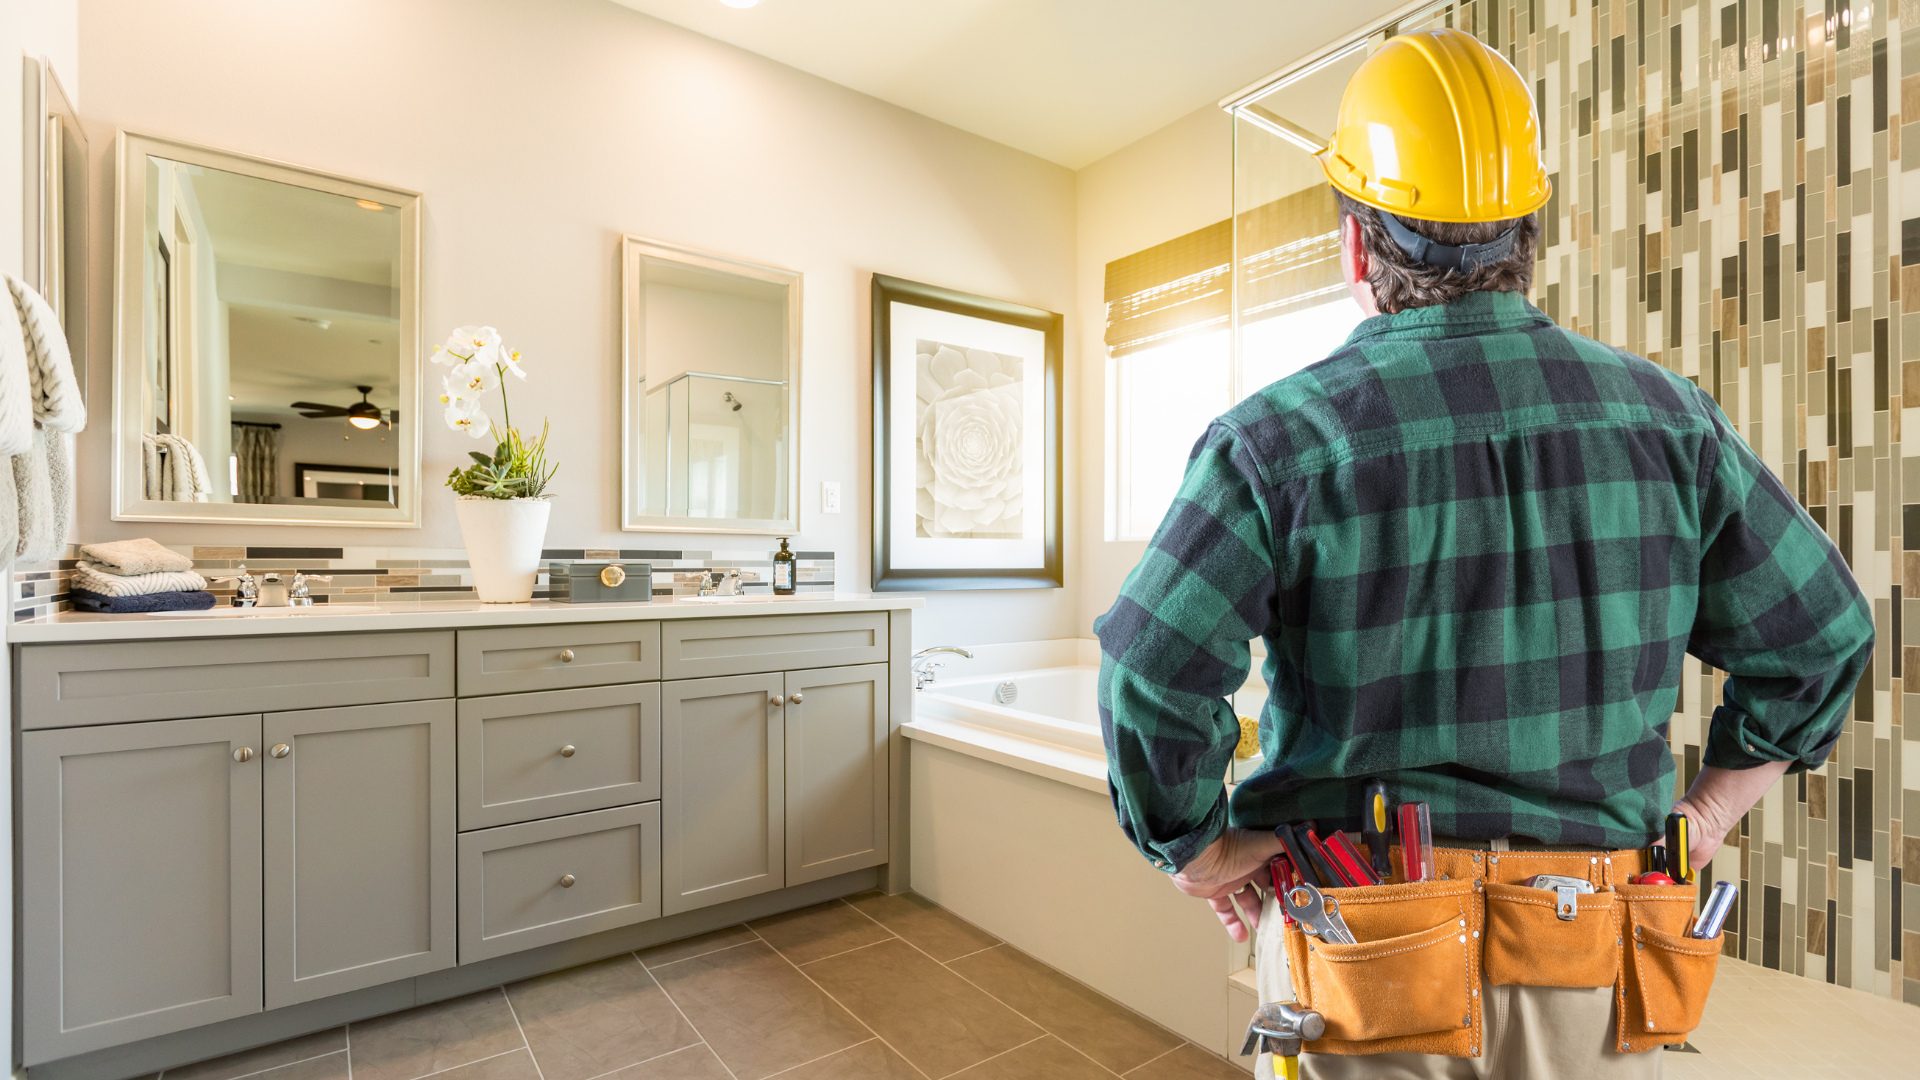 Home DIY Tips: Knowing When to Call the Contractors